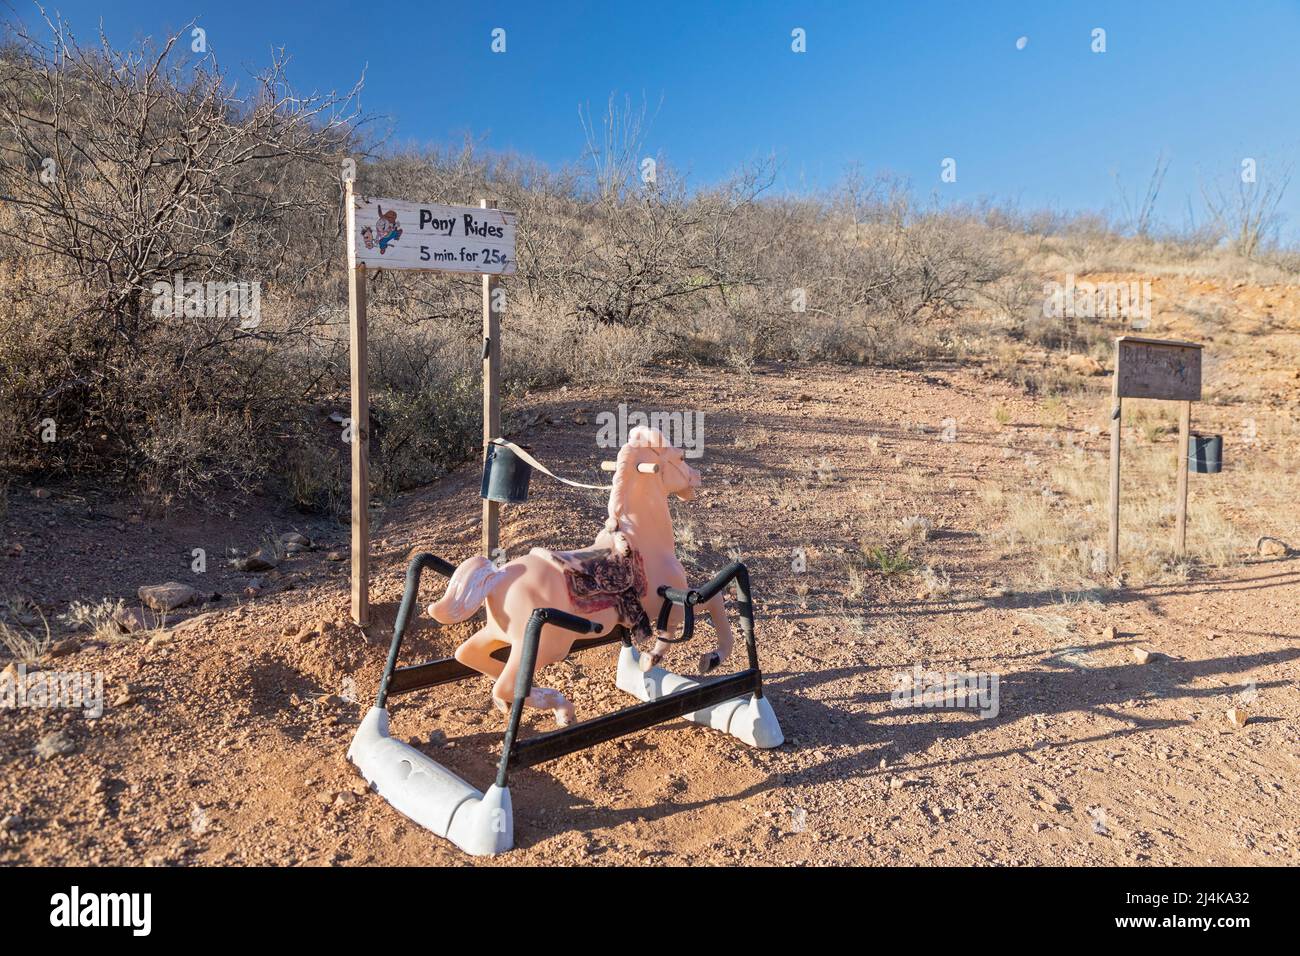 Douglas, Arizona - Pony rides are offered for 25 cents along the Geronimo Trail near the U.S.-Mexico border in Chihuahuan Desert. Stock Photo